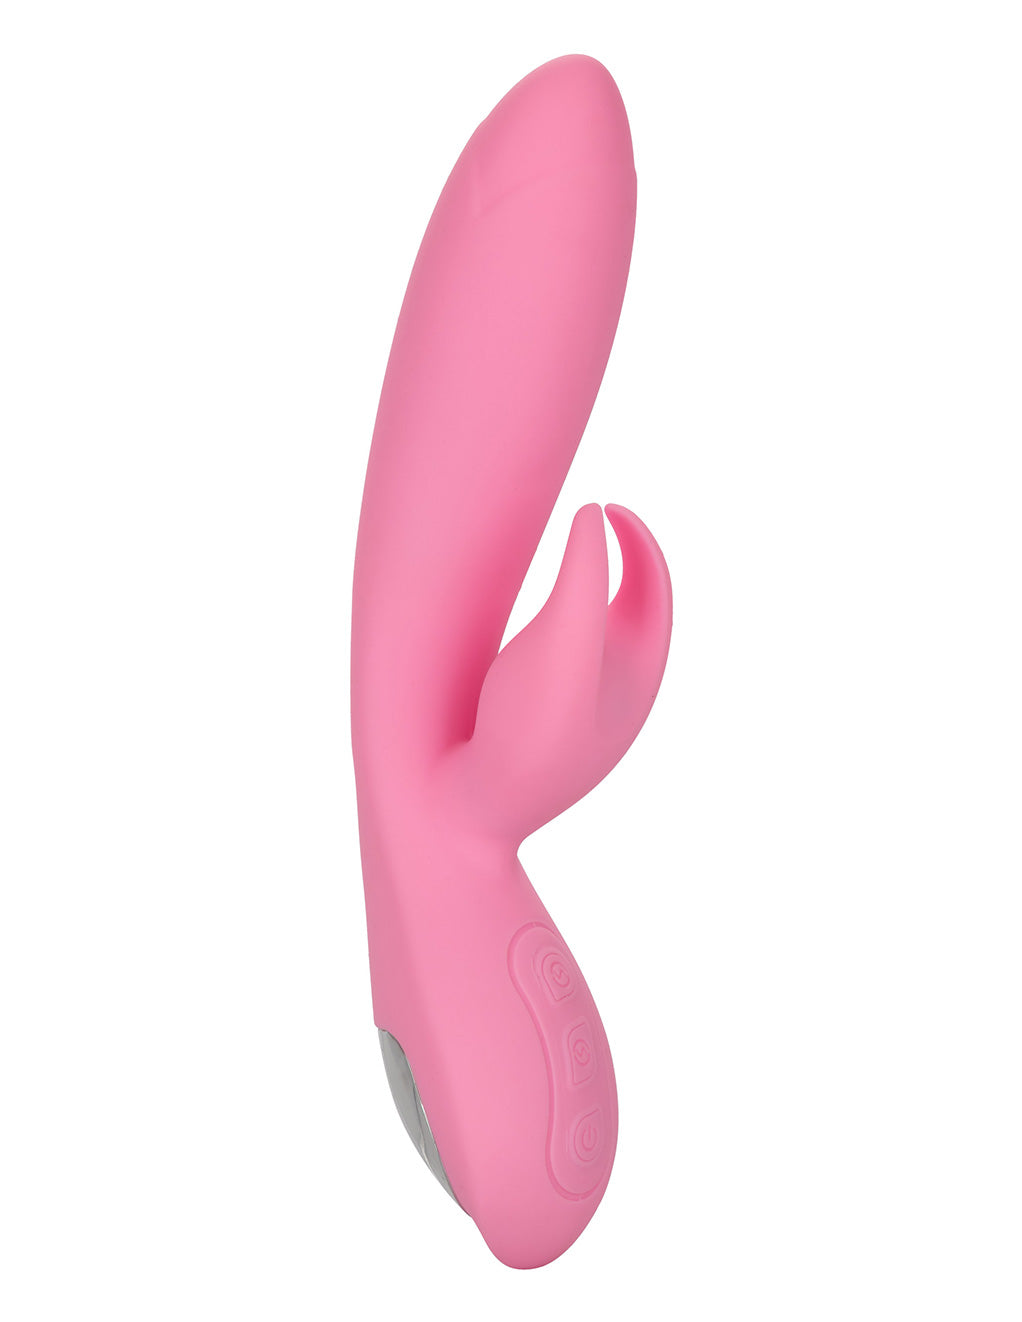 HUSTLER® Playthings Silicone Dual Climaxer Vibrator Novelties at Hustler Hollywood picture